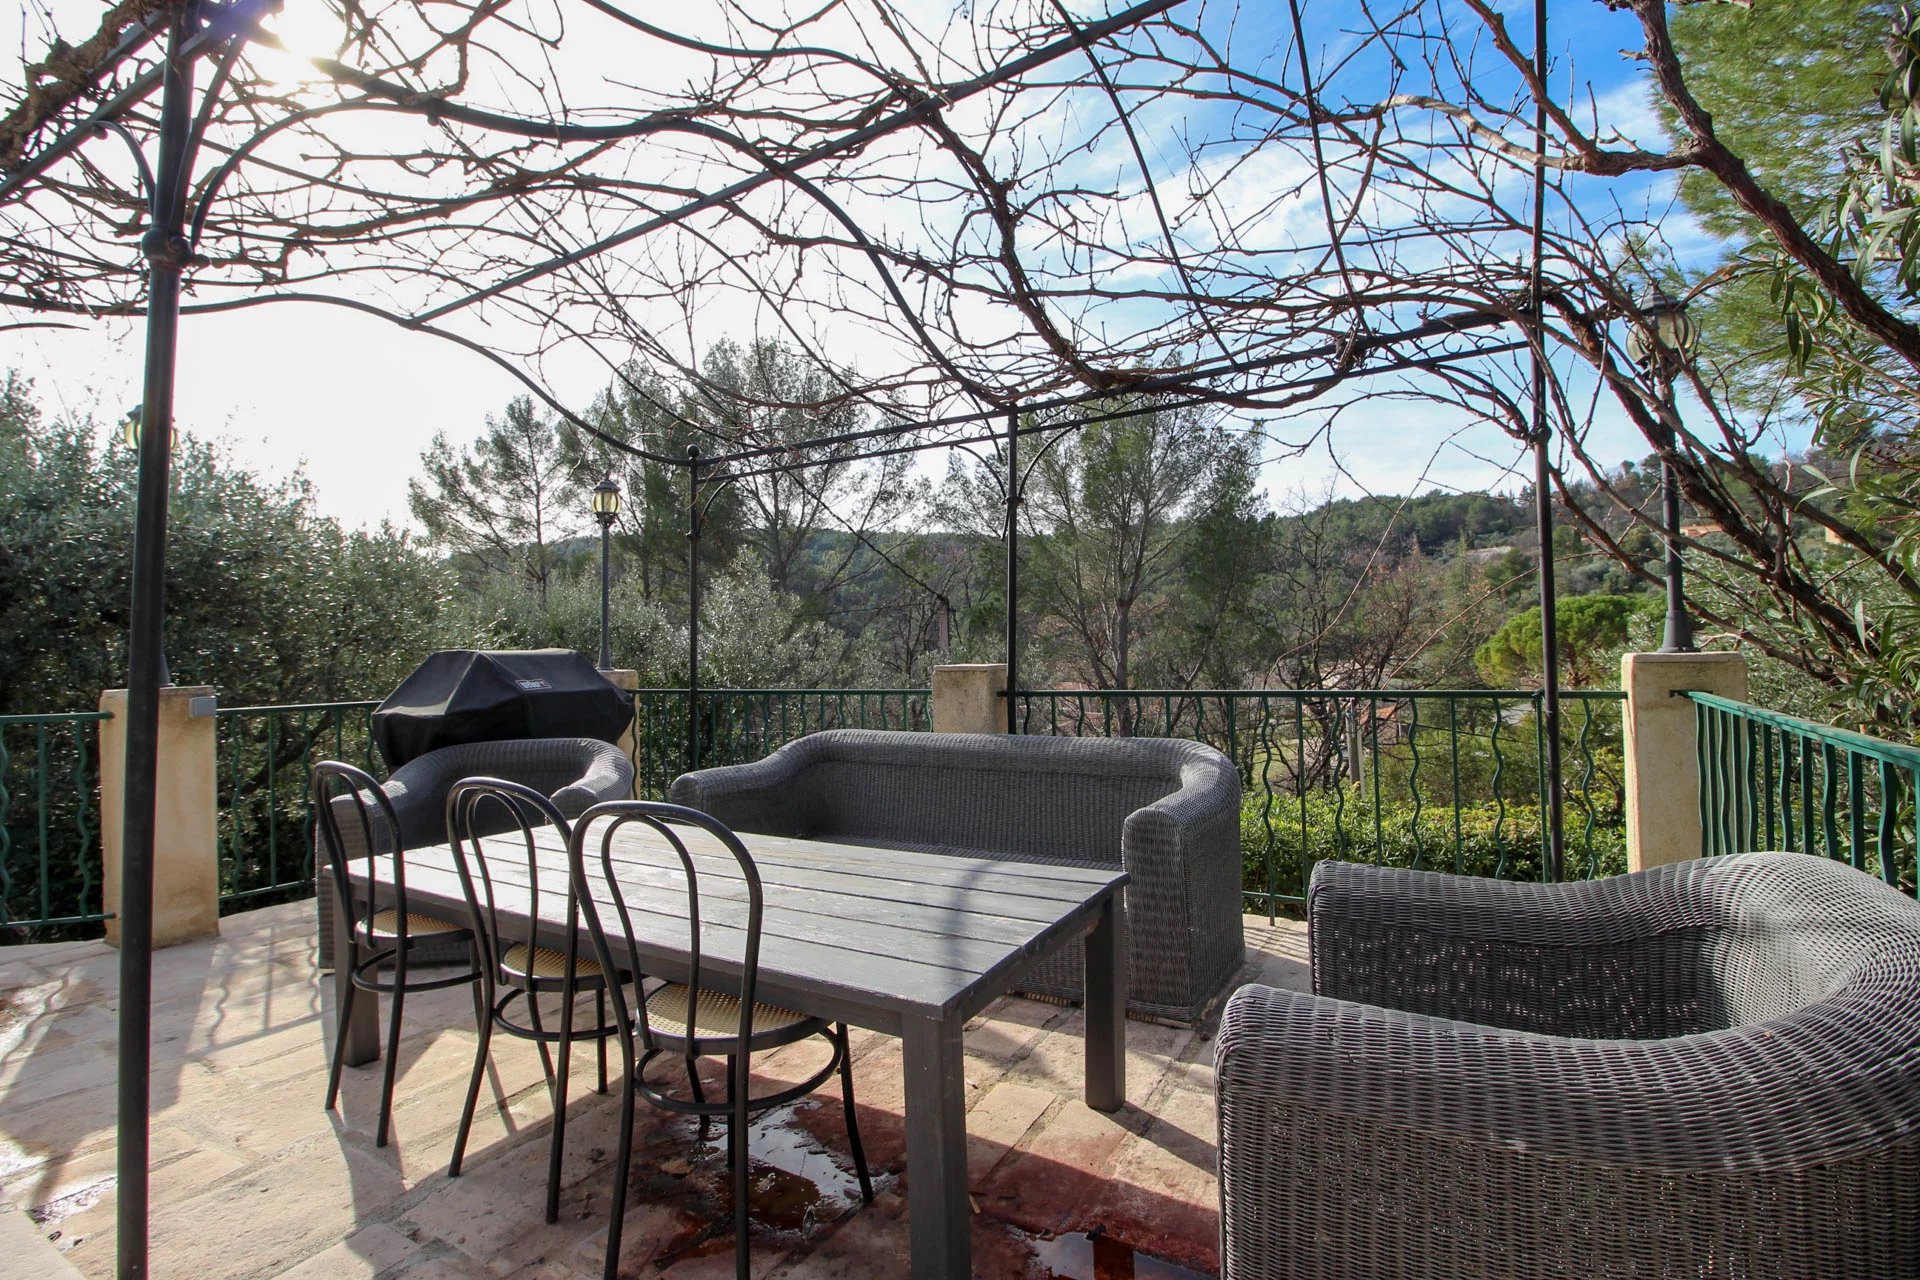 Charming villa with view and pool - Seillans